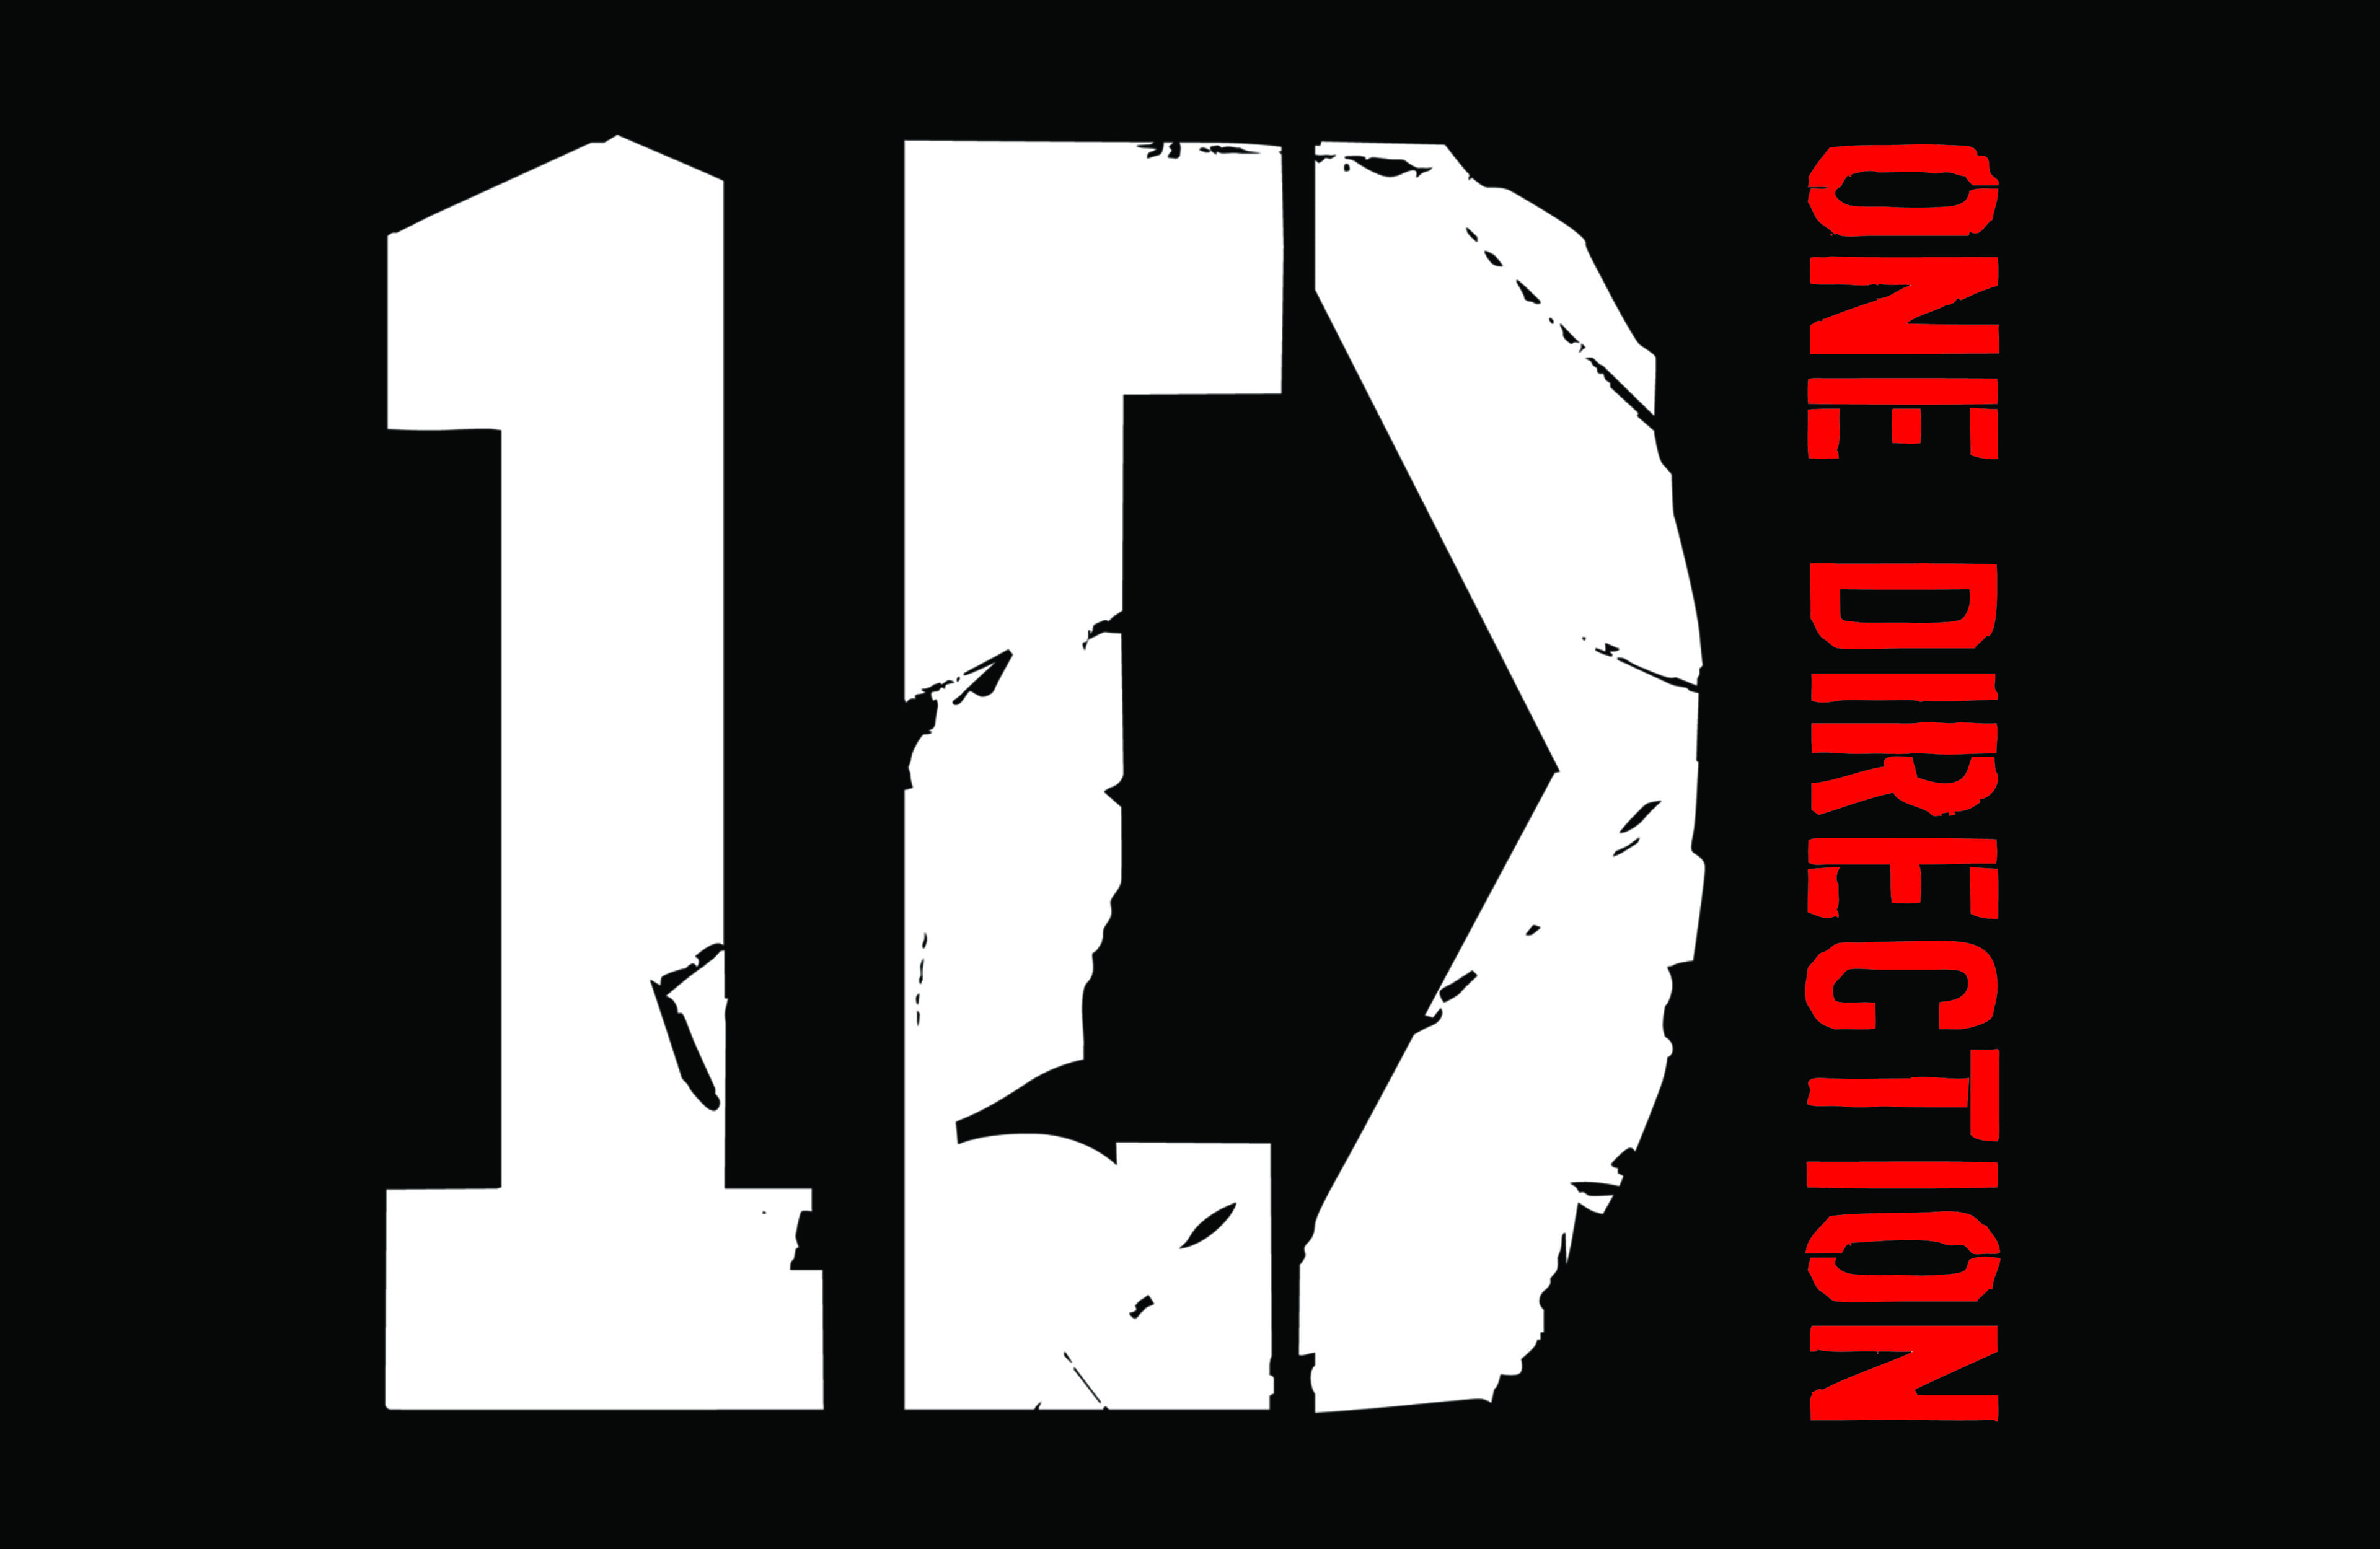 One Direction Logo And Symbol Meaning History Png